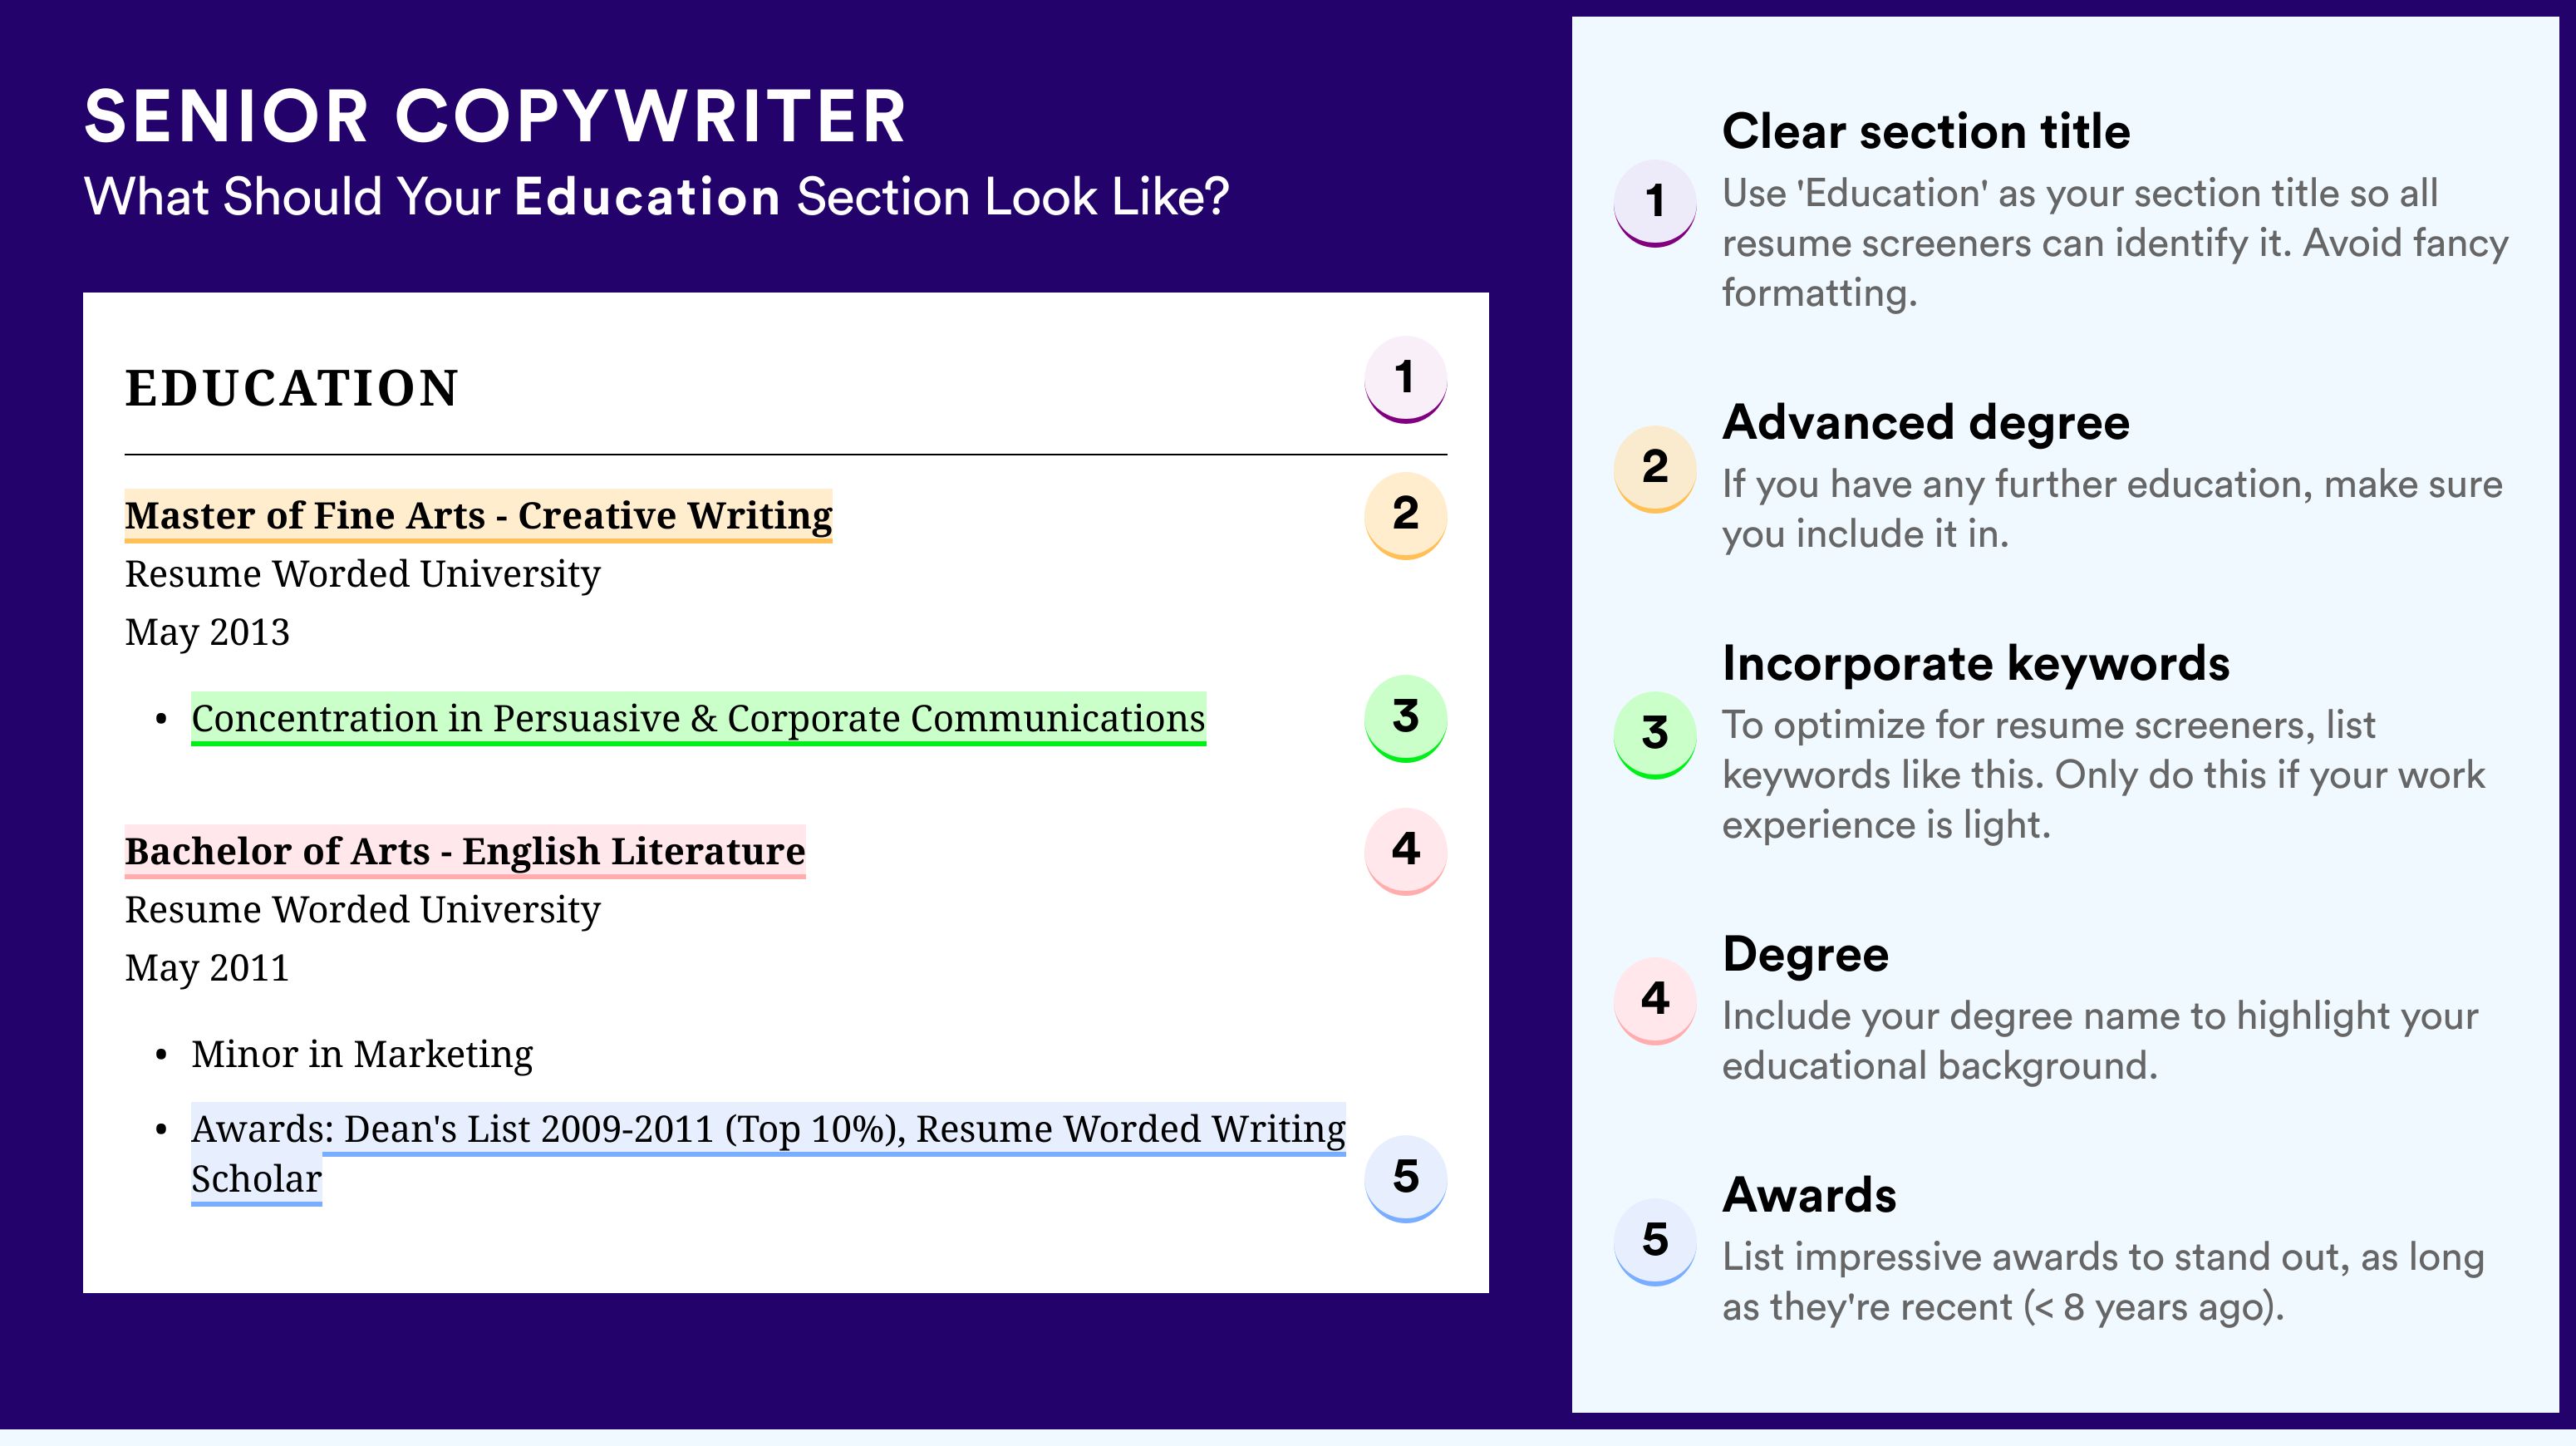 How To Write An Education Section - Senior Copywriter Roles